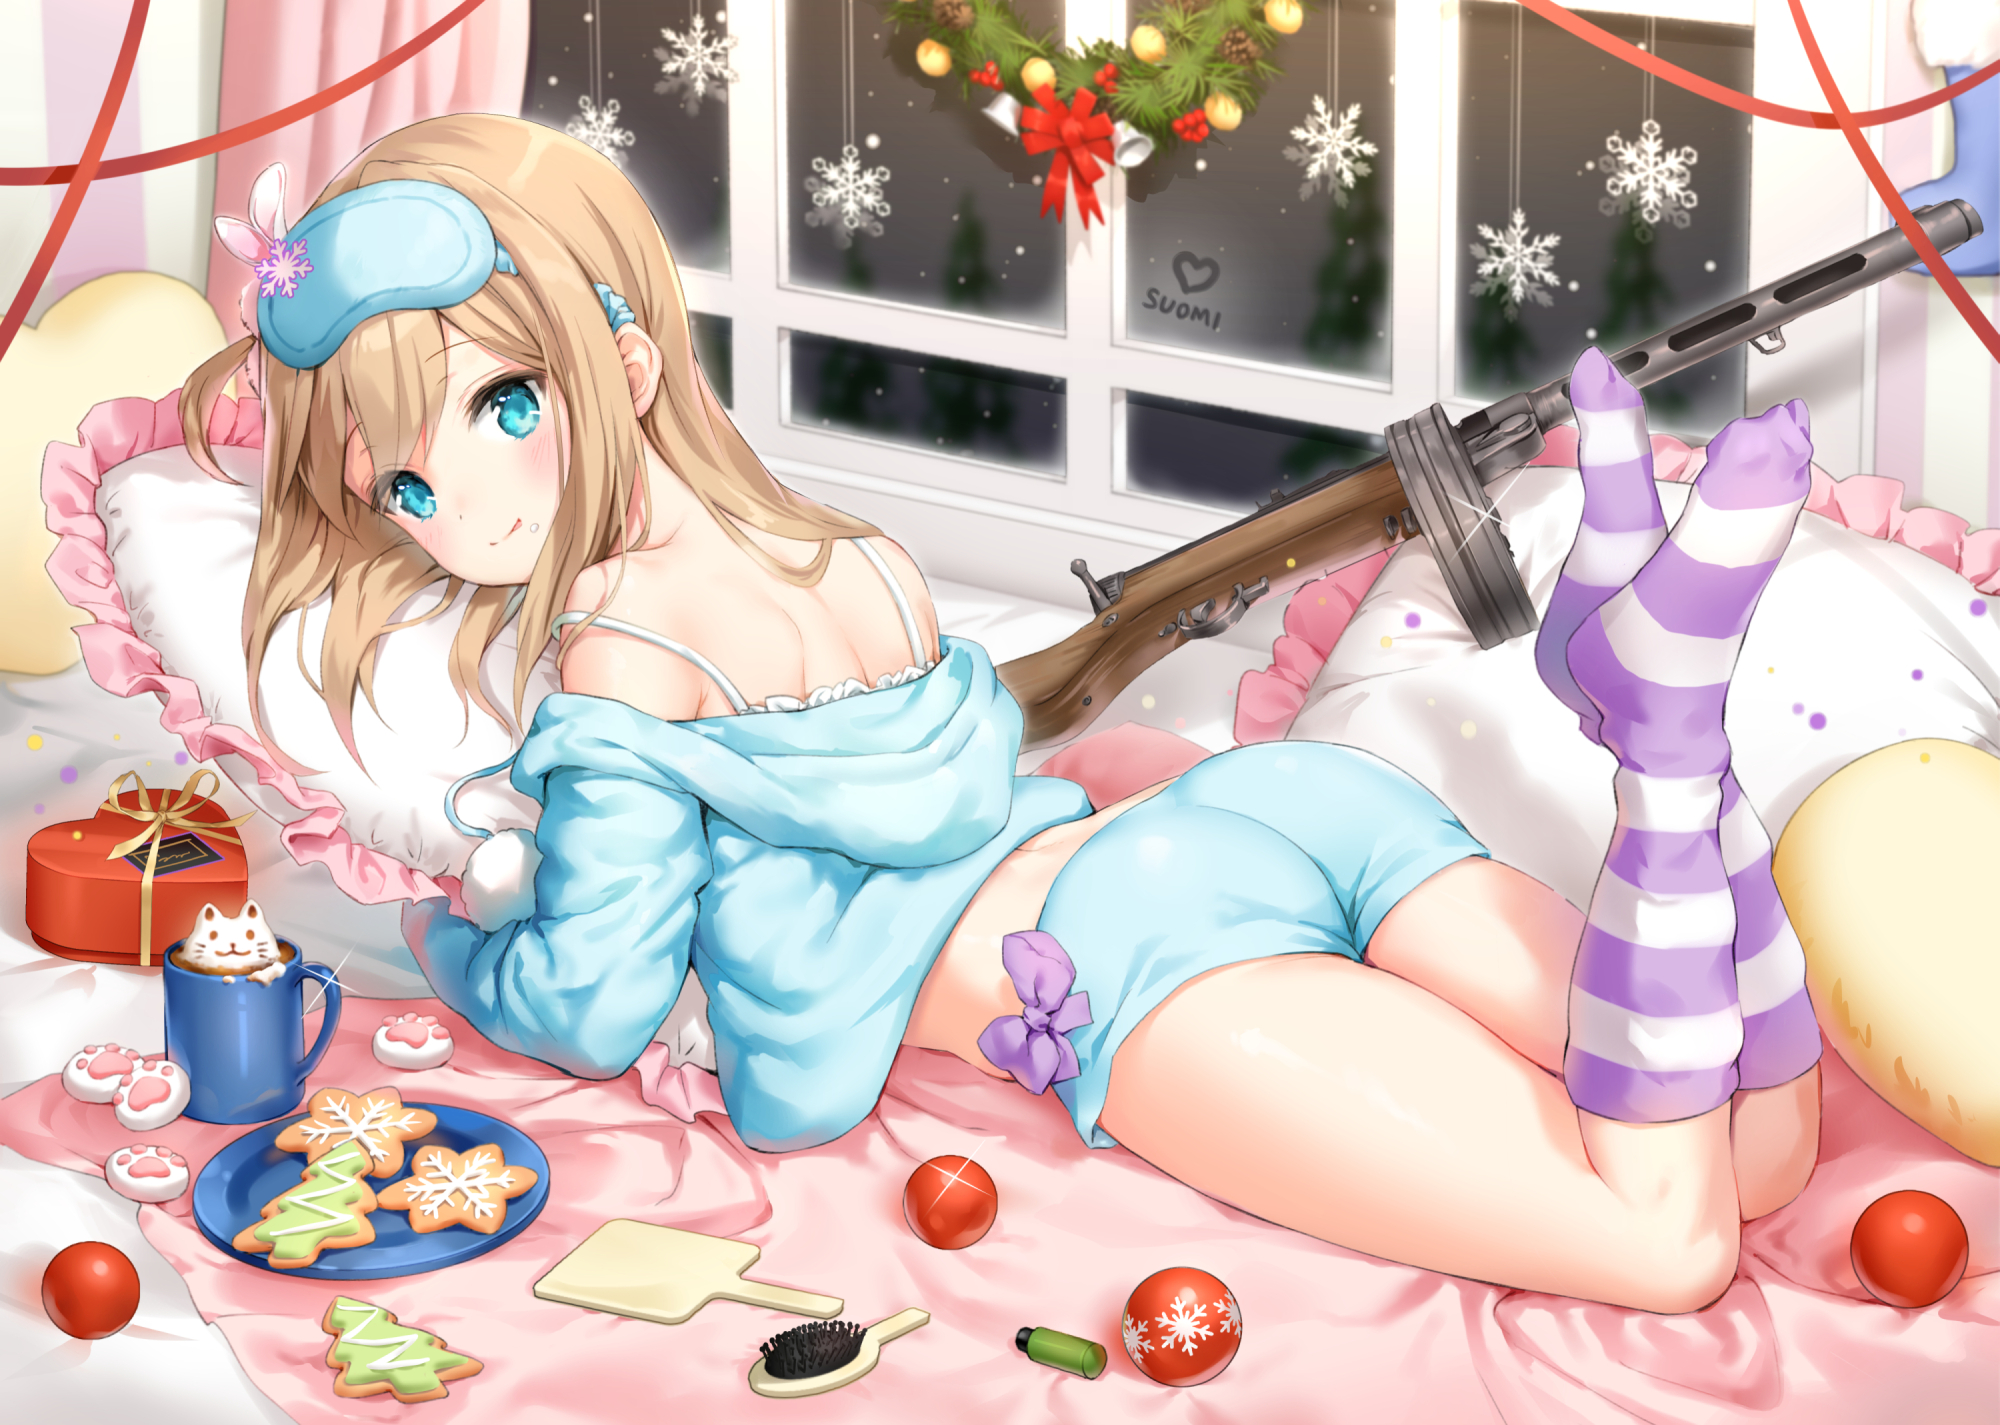 Anime 2000x1425 anime anime girls Suomi (Girls Frontline) Girls Frontline smiling lying down lying on front bed pillow window looking at viewer socks striped socks long hair blonde blue eyes blushing cookies Christmas ornaments  ass heart (design) shorts indoors women indoors sleep mask tongue out gun feet in the air girls with guns pyjamas cup drink hairbrush